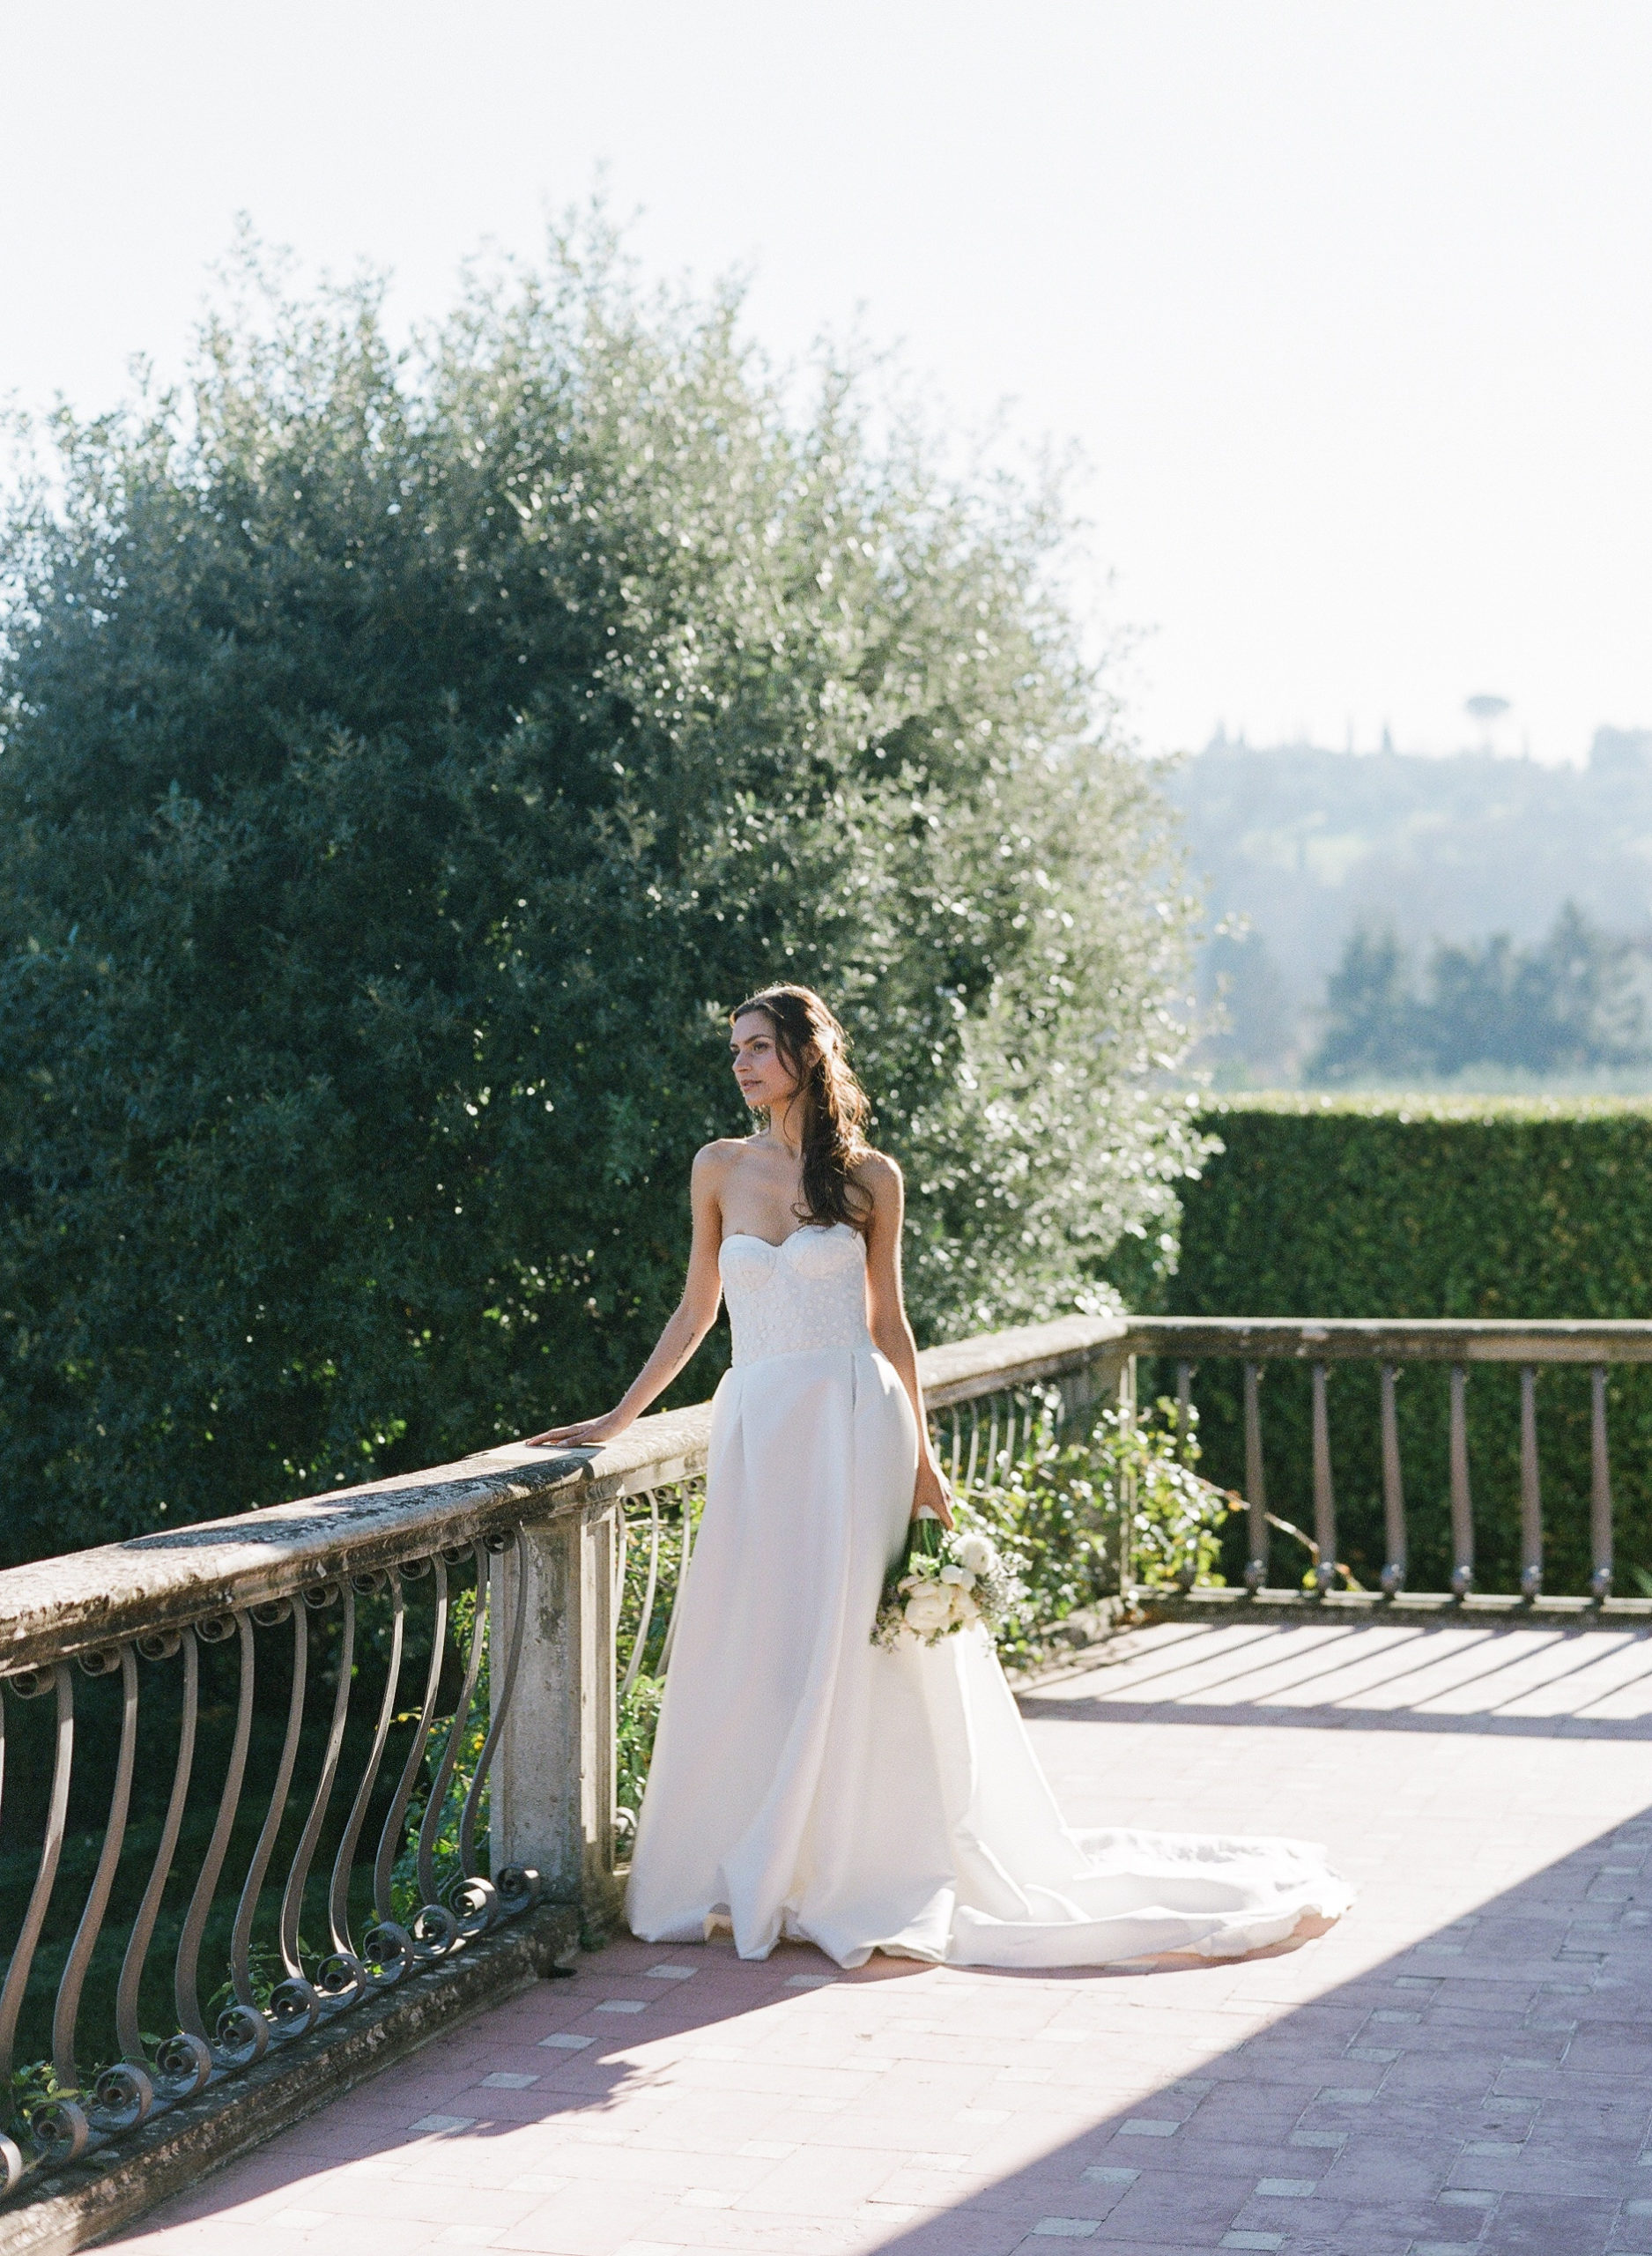 Wedding Photographer in Florence